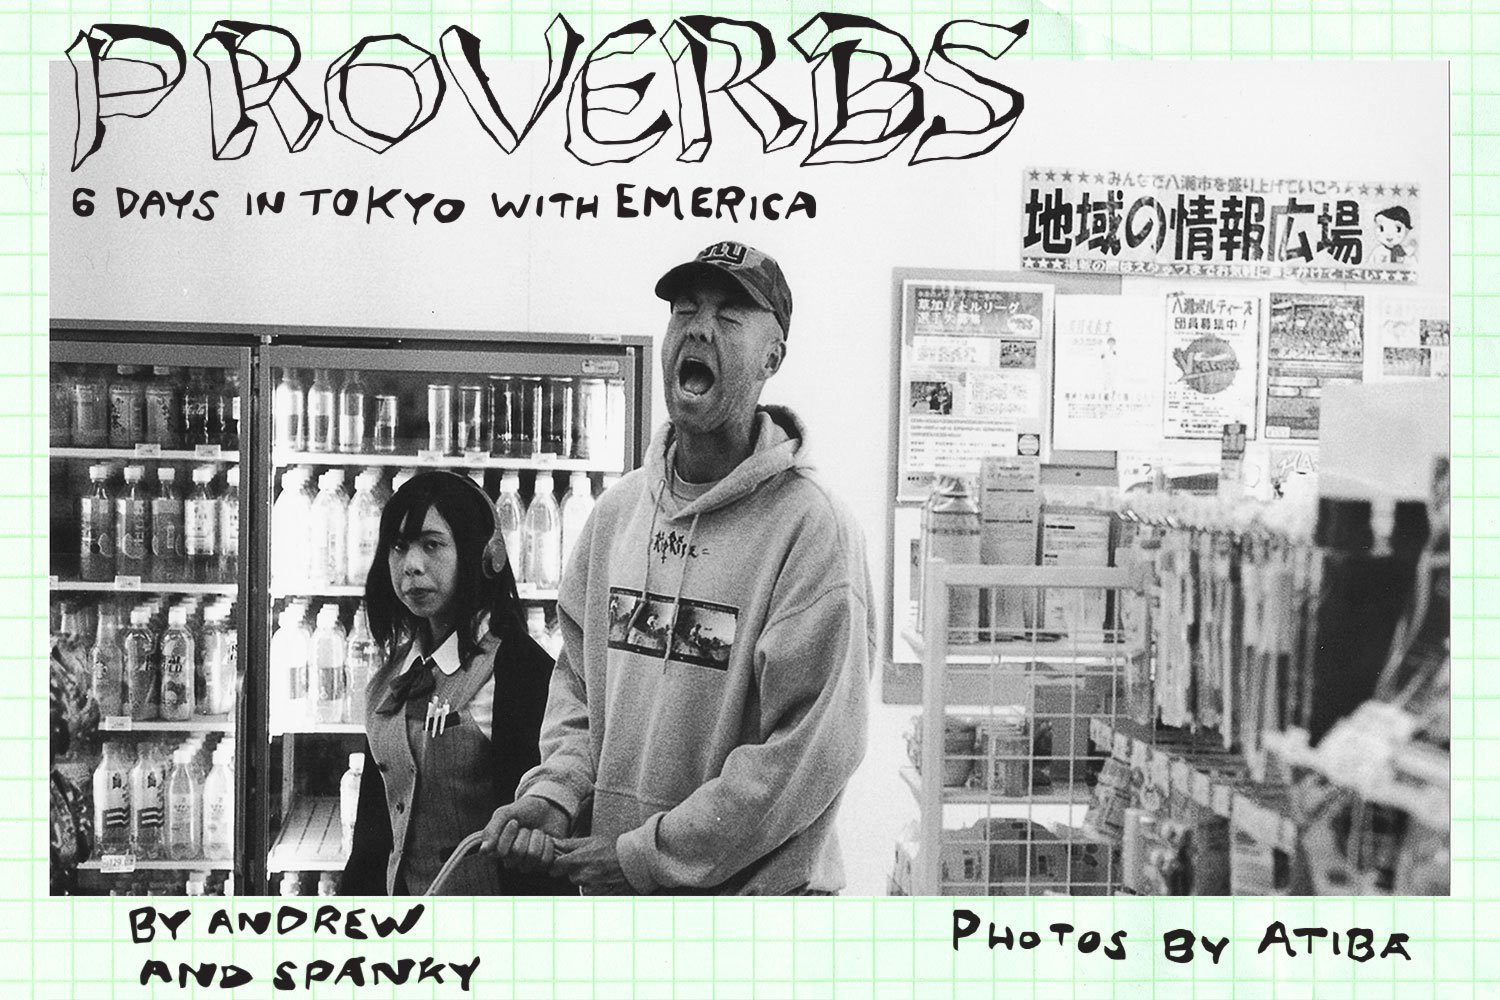 Proverbs Tour by Emerica video cover